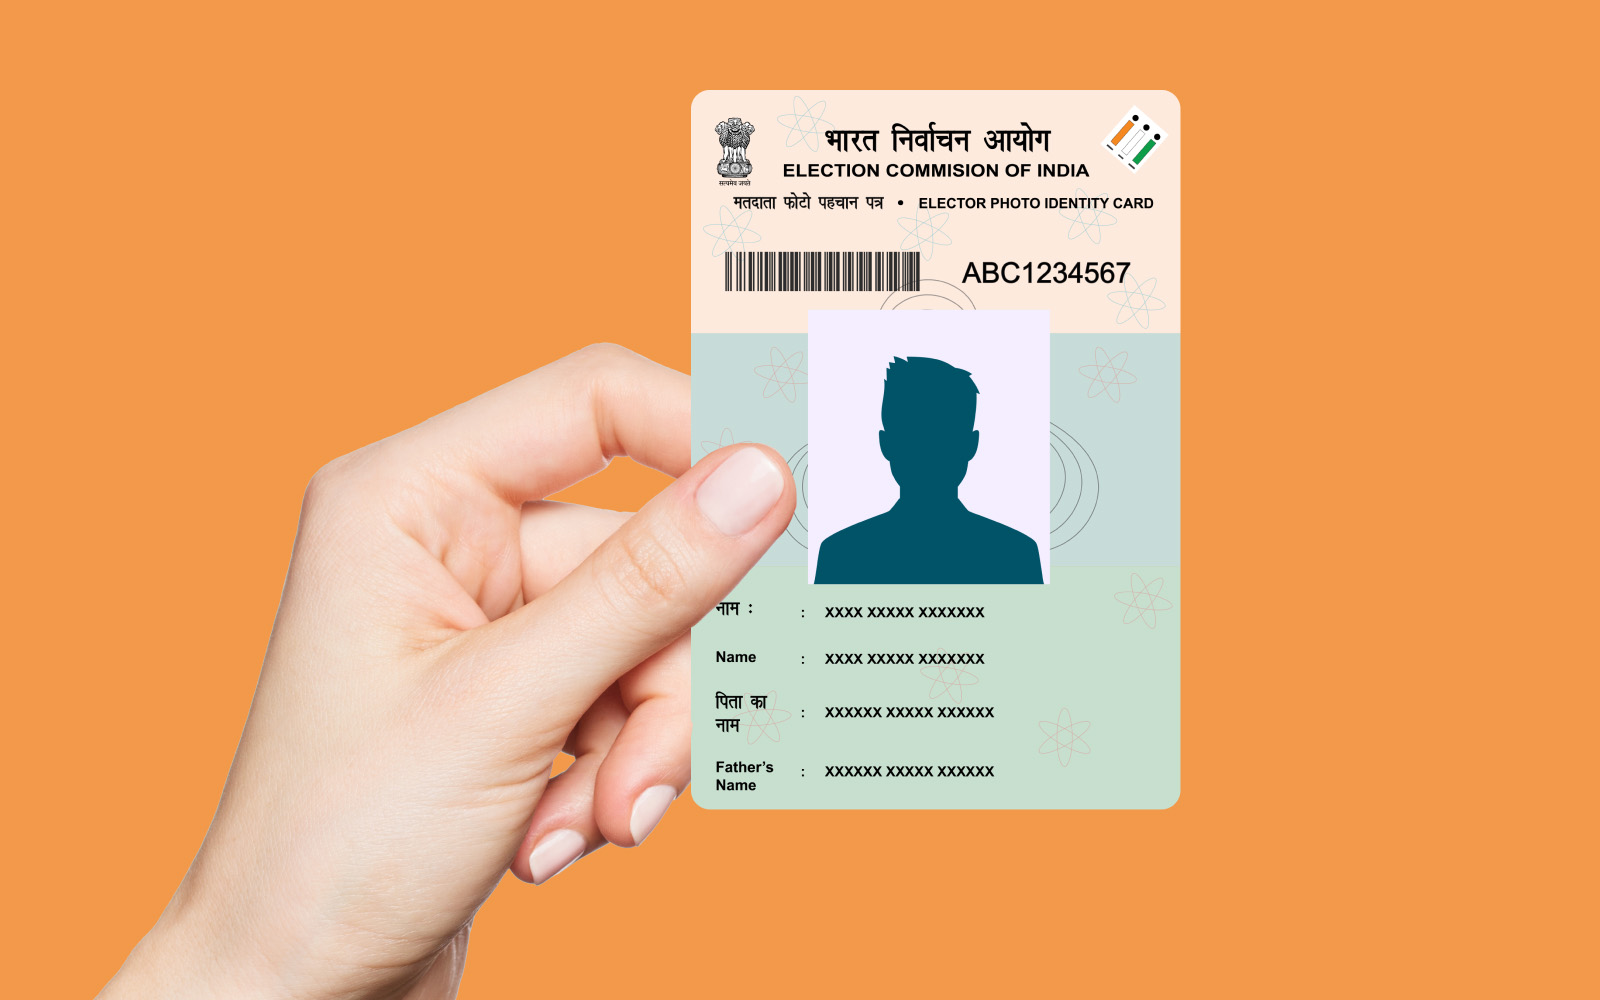 What is EPIC Number in Your Voter ID Card | Paytm Blog